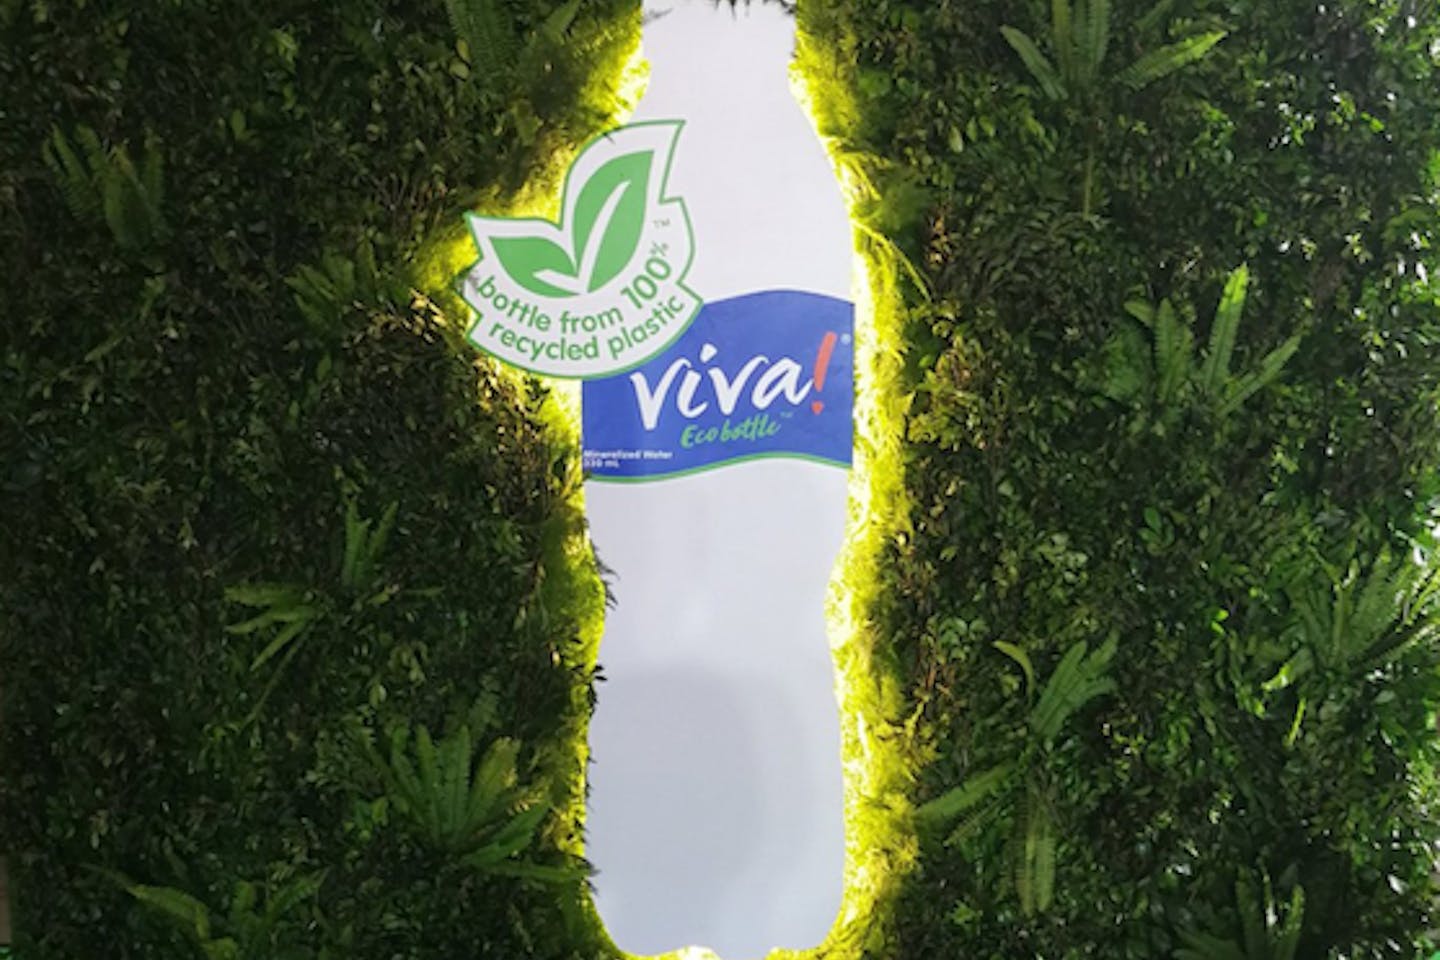 Viva recycled plastic water bottle from Coca-Cola